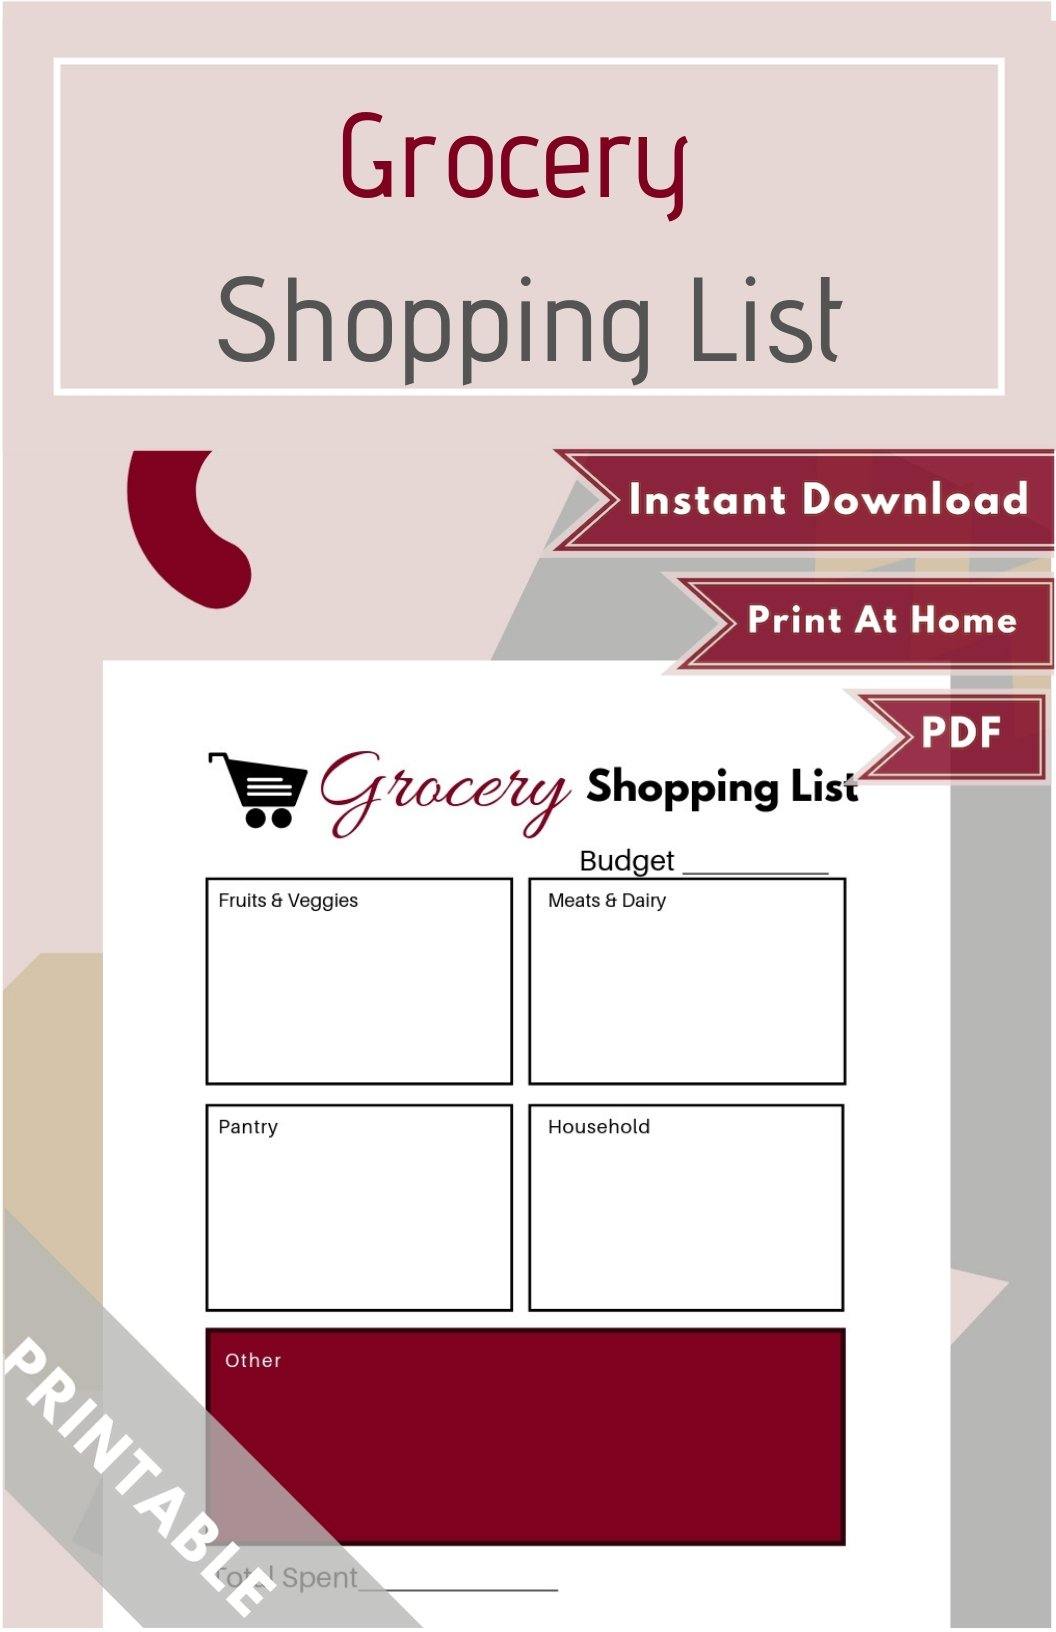 Grocery Shopping List PDF (Available in Various Colors) - Healthy Wealthy Skinny